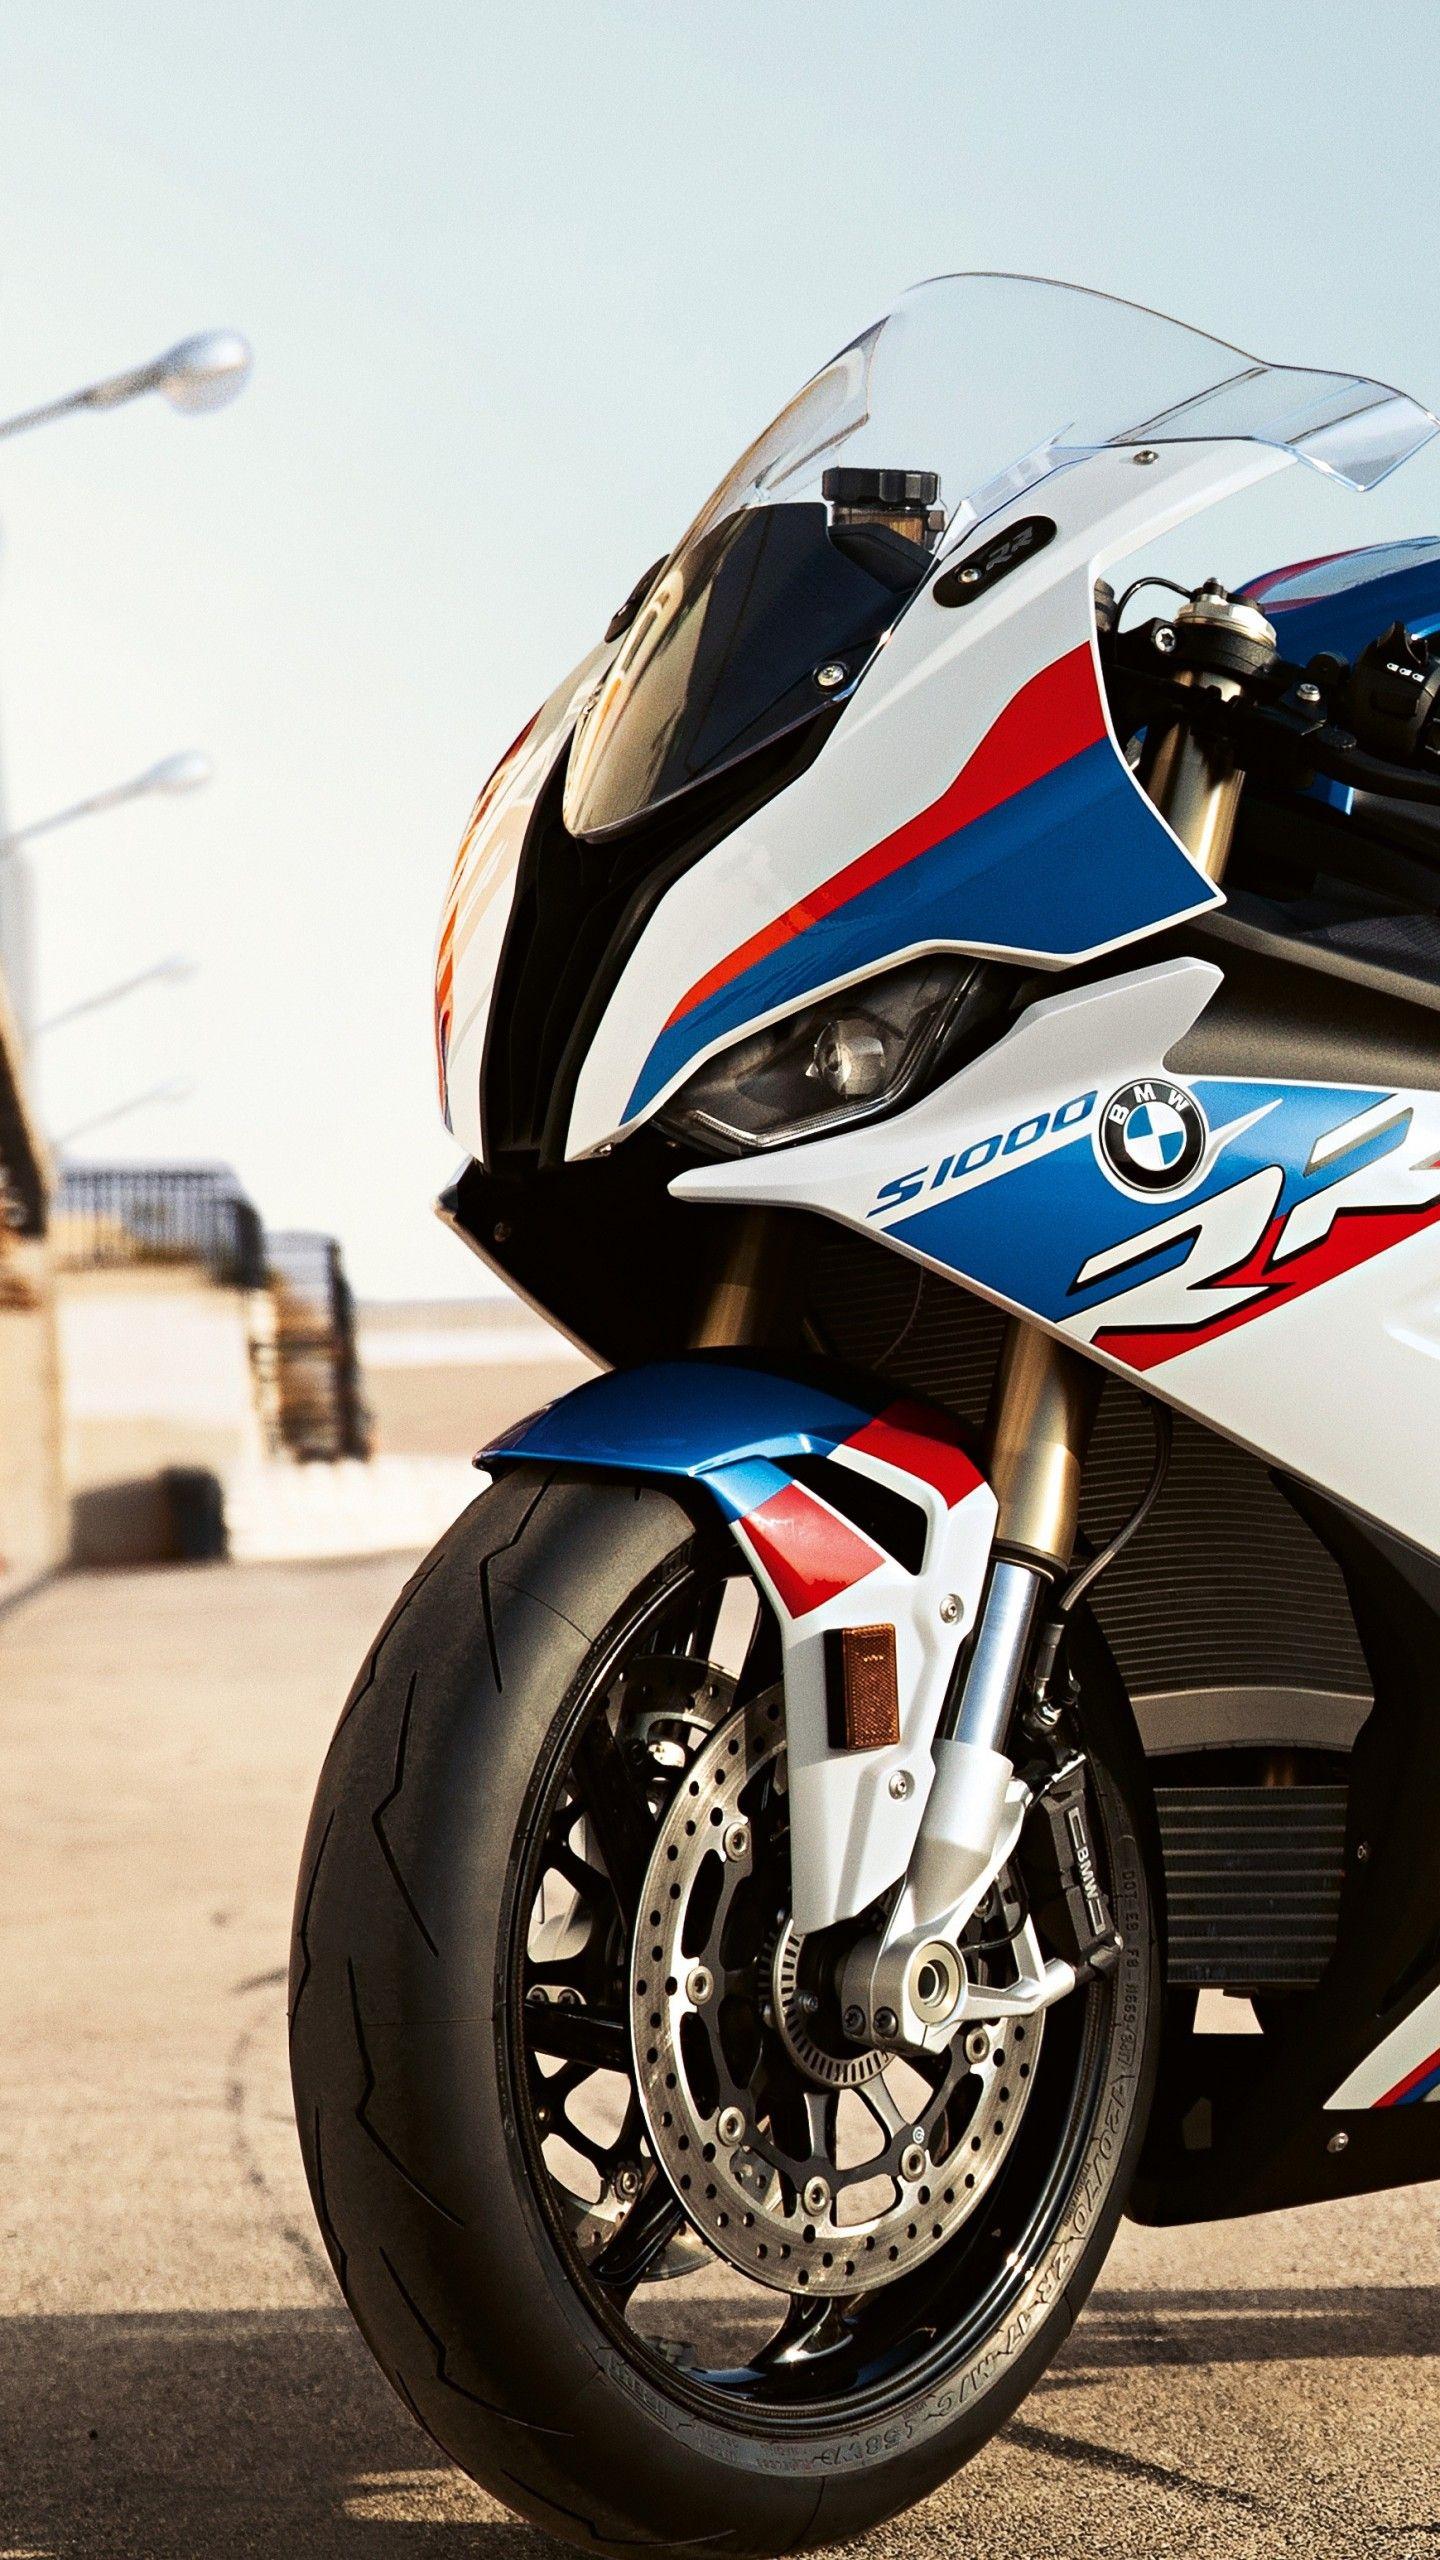 2020 Bmw S1000rr Wallpapers Top Free 2020 Bmw S1000rr Backgrounds Wallpaperaccess